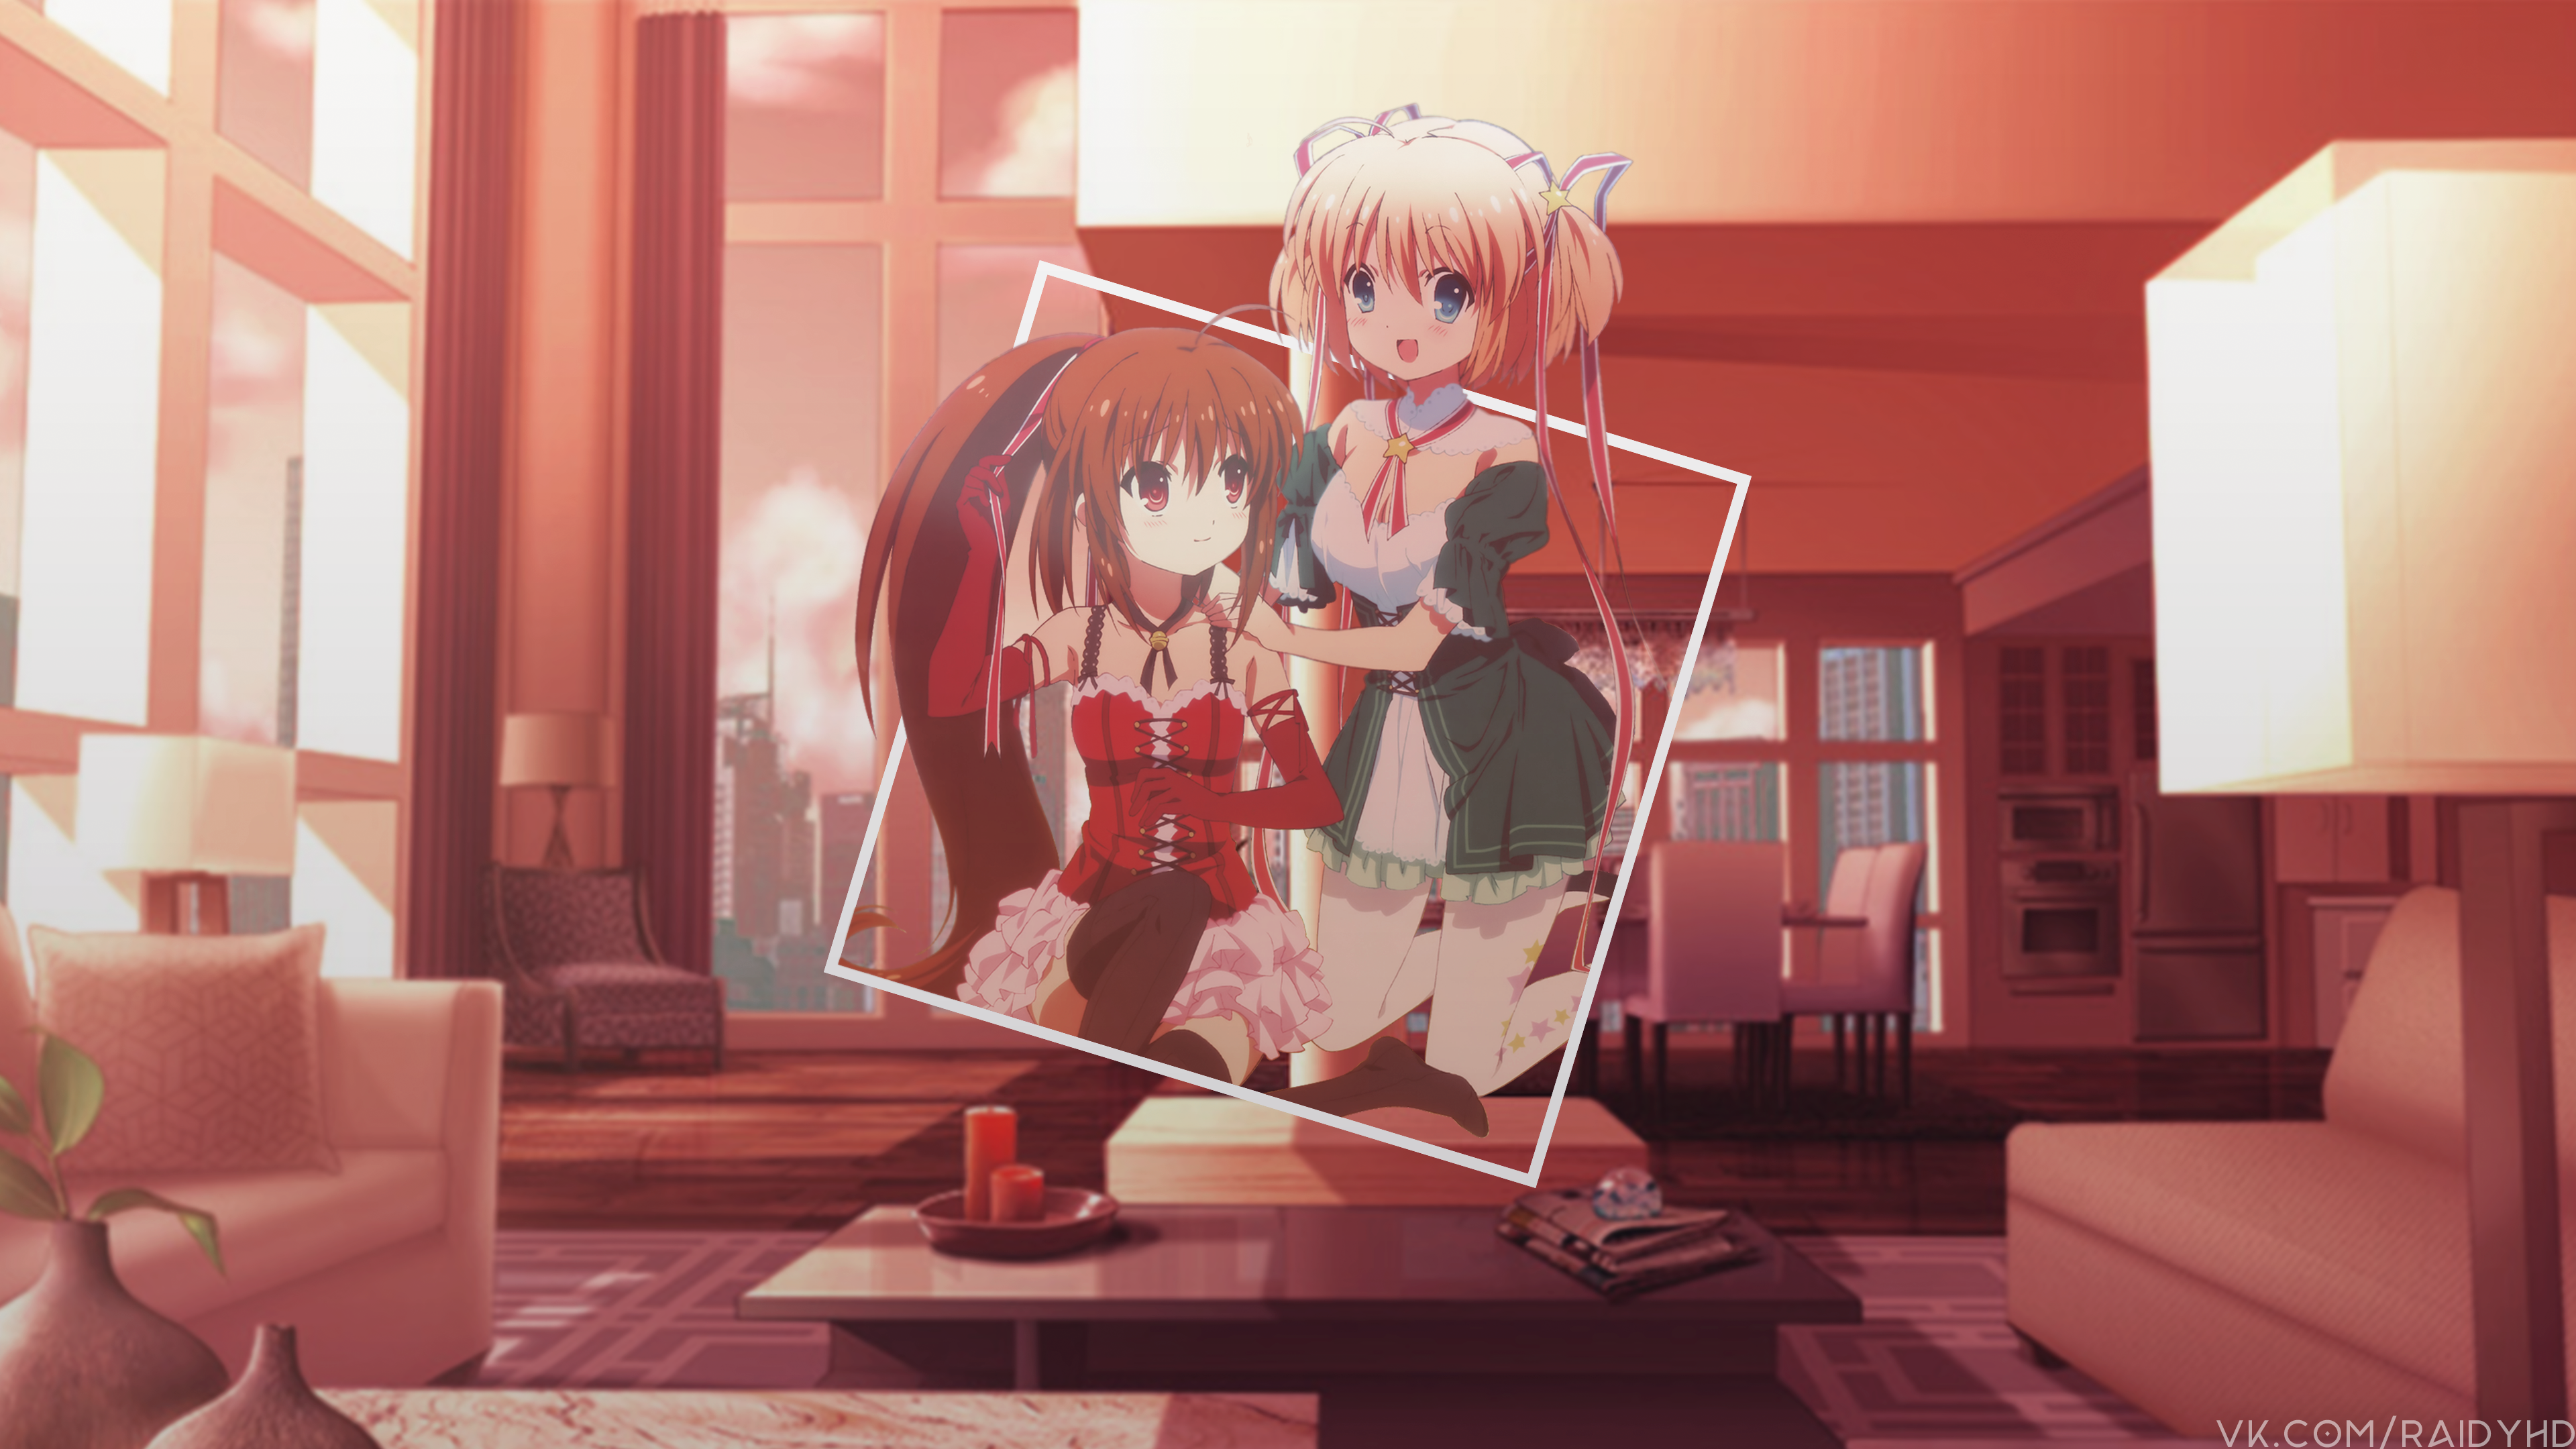 Anime 3840x2160 anime girls anime picture-in-picture Little Busters!